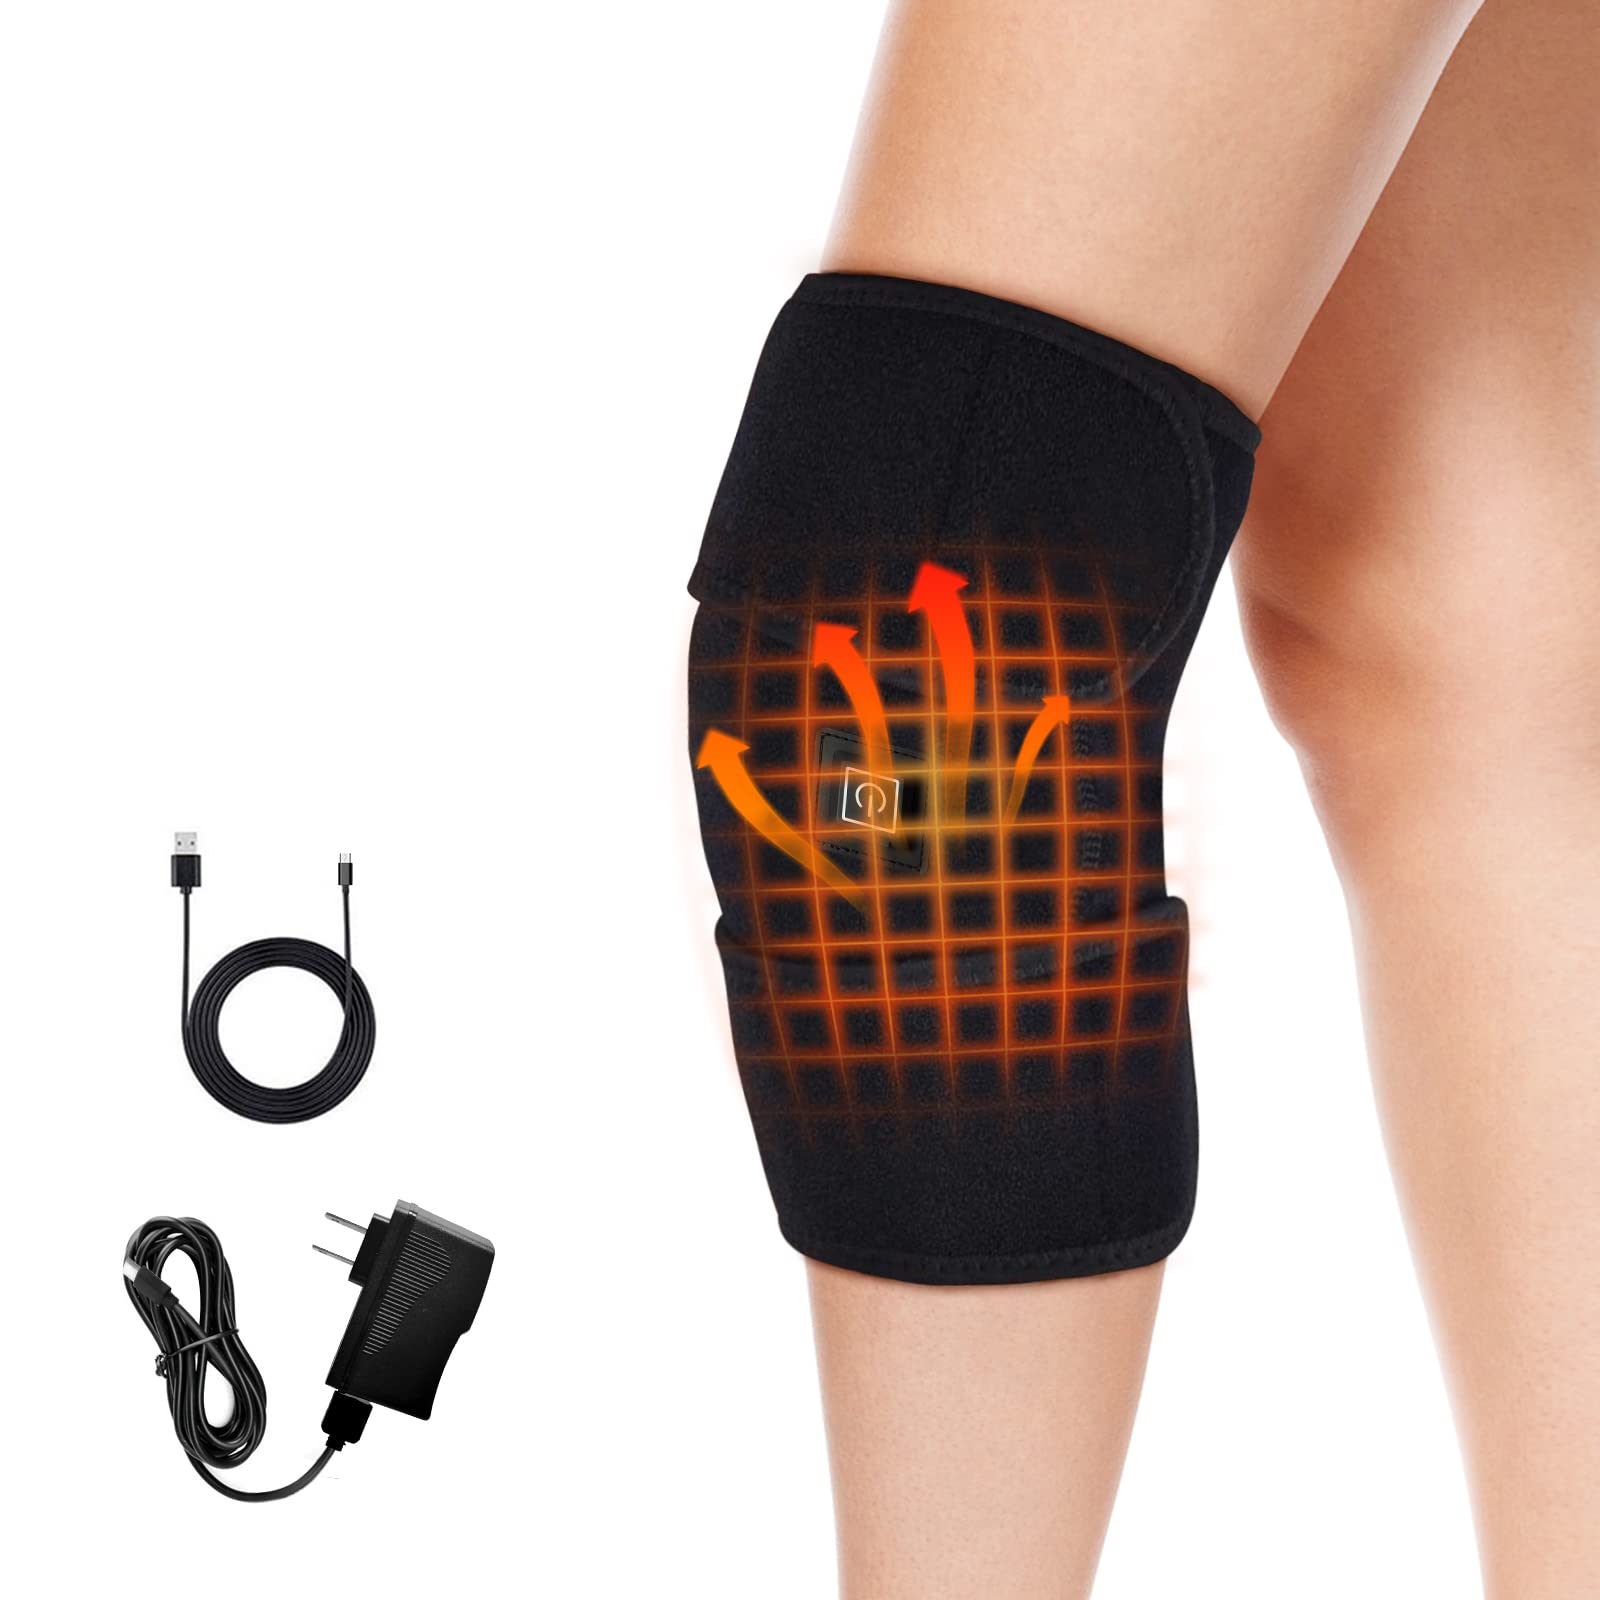 2-in-1 Arthritis Pain Relief Knee Brace, Heated Knee Support For Arthritis, Knee  Heating Pad For Hot Or Cold Therapy Keep Warm, Electric Heated Knee W